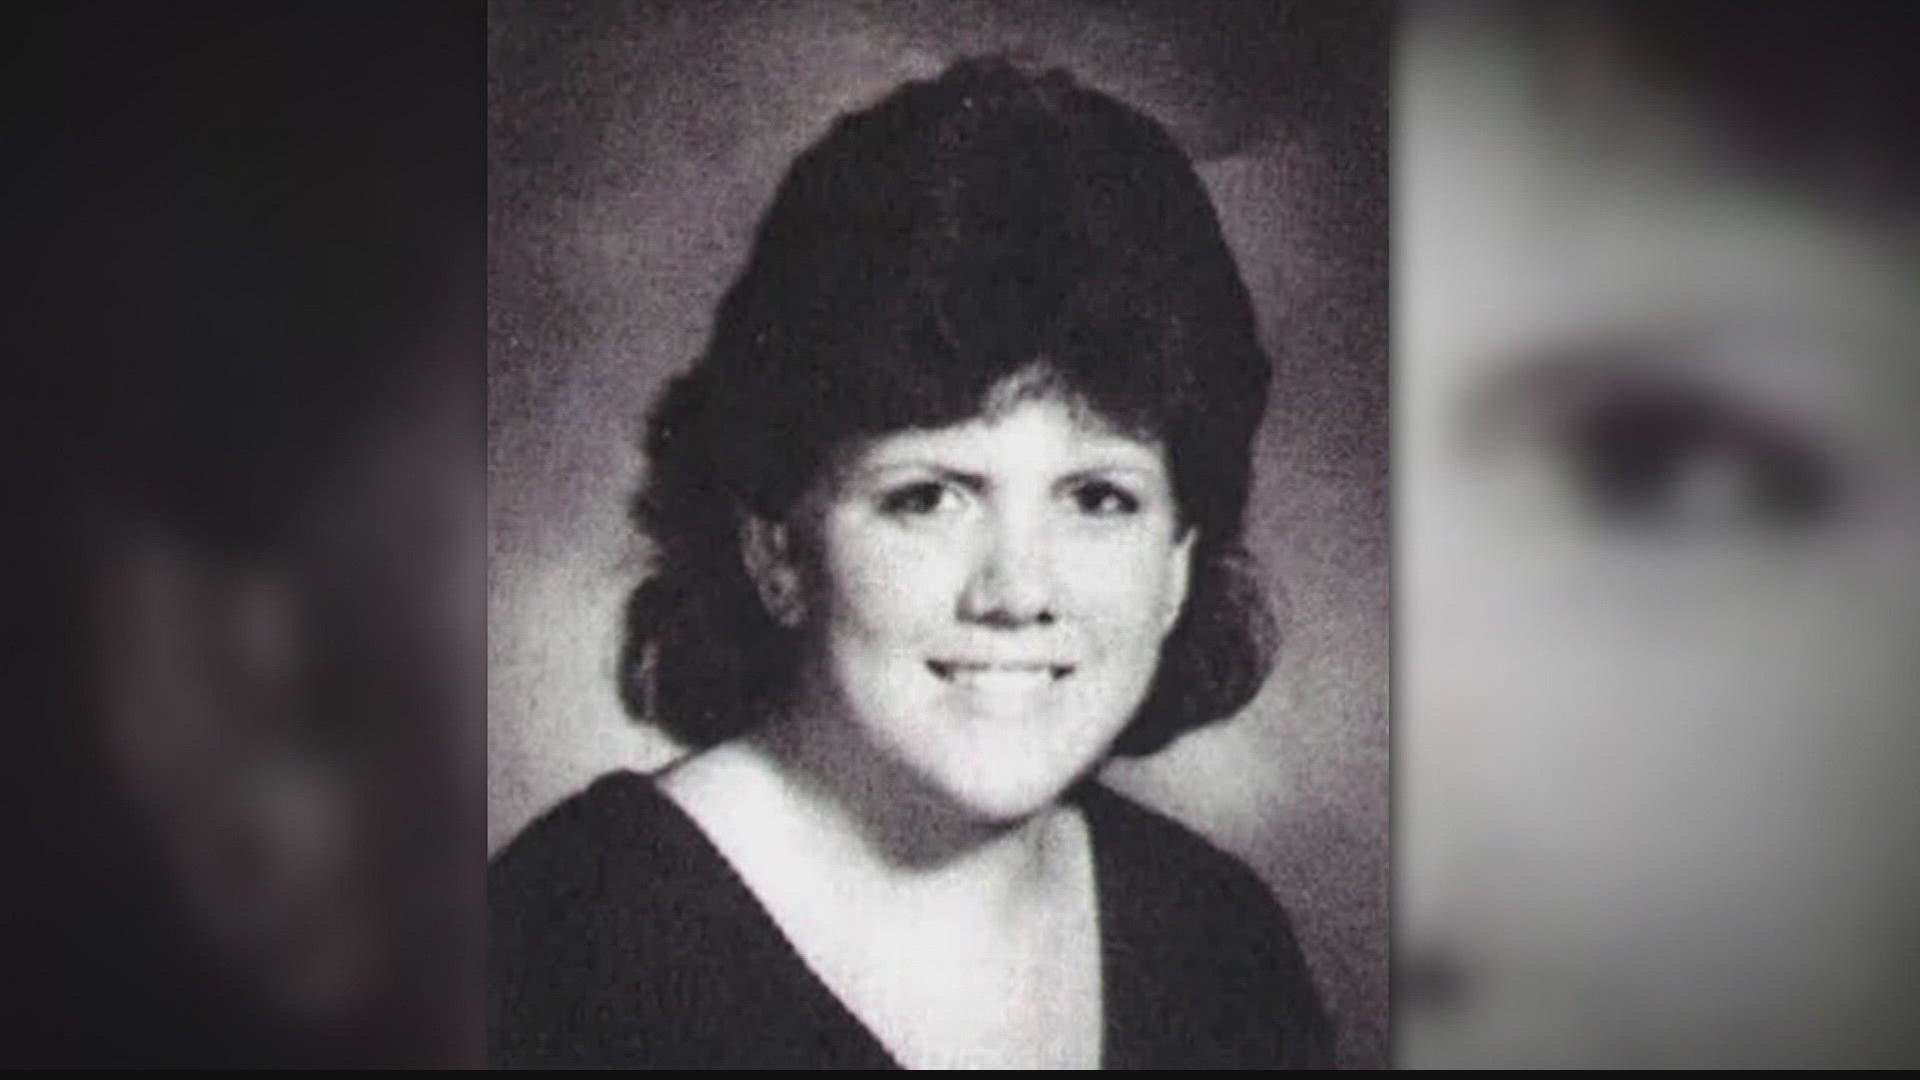 The FBI's Atlanta special agent in charge said DNA testing had identified Henry Fredrick "Hoss" Wise as the killer of Stacey Lyn Chahorski.